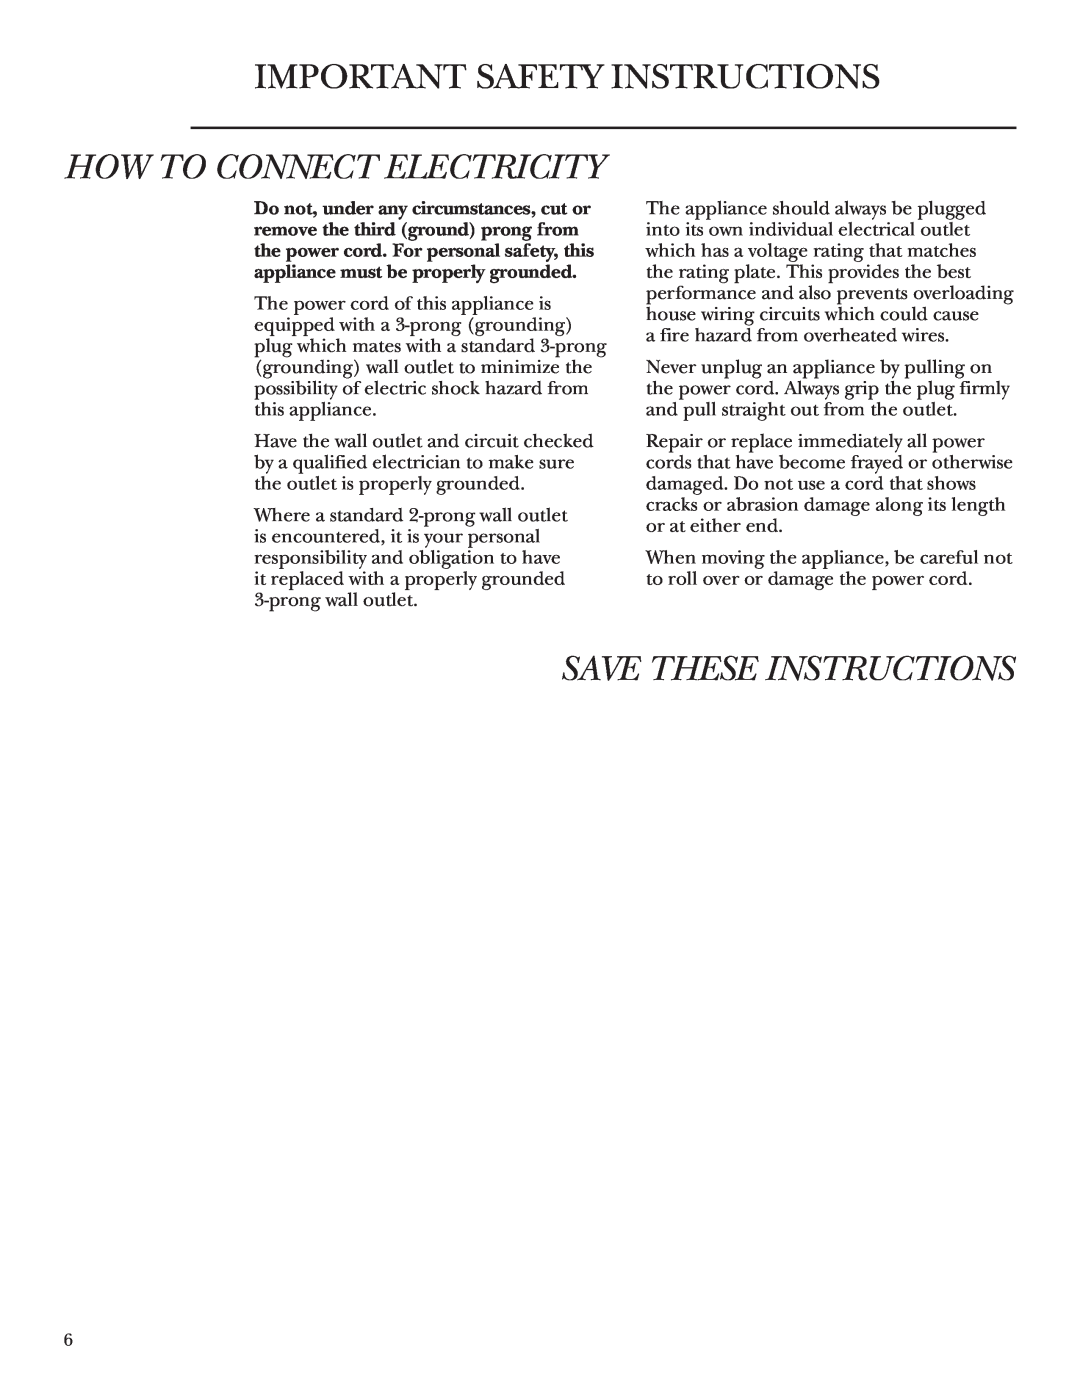 GE ZDWC240 owner manual How To Connect Electricity, Save These Instructions, Important Safety Instructions 